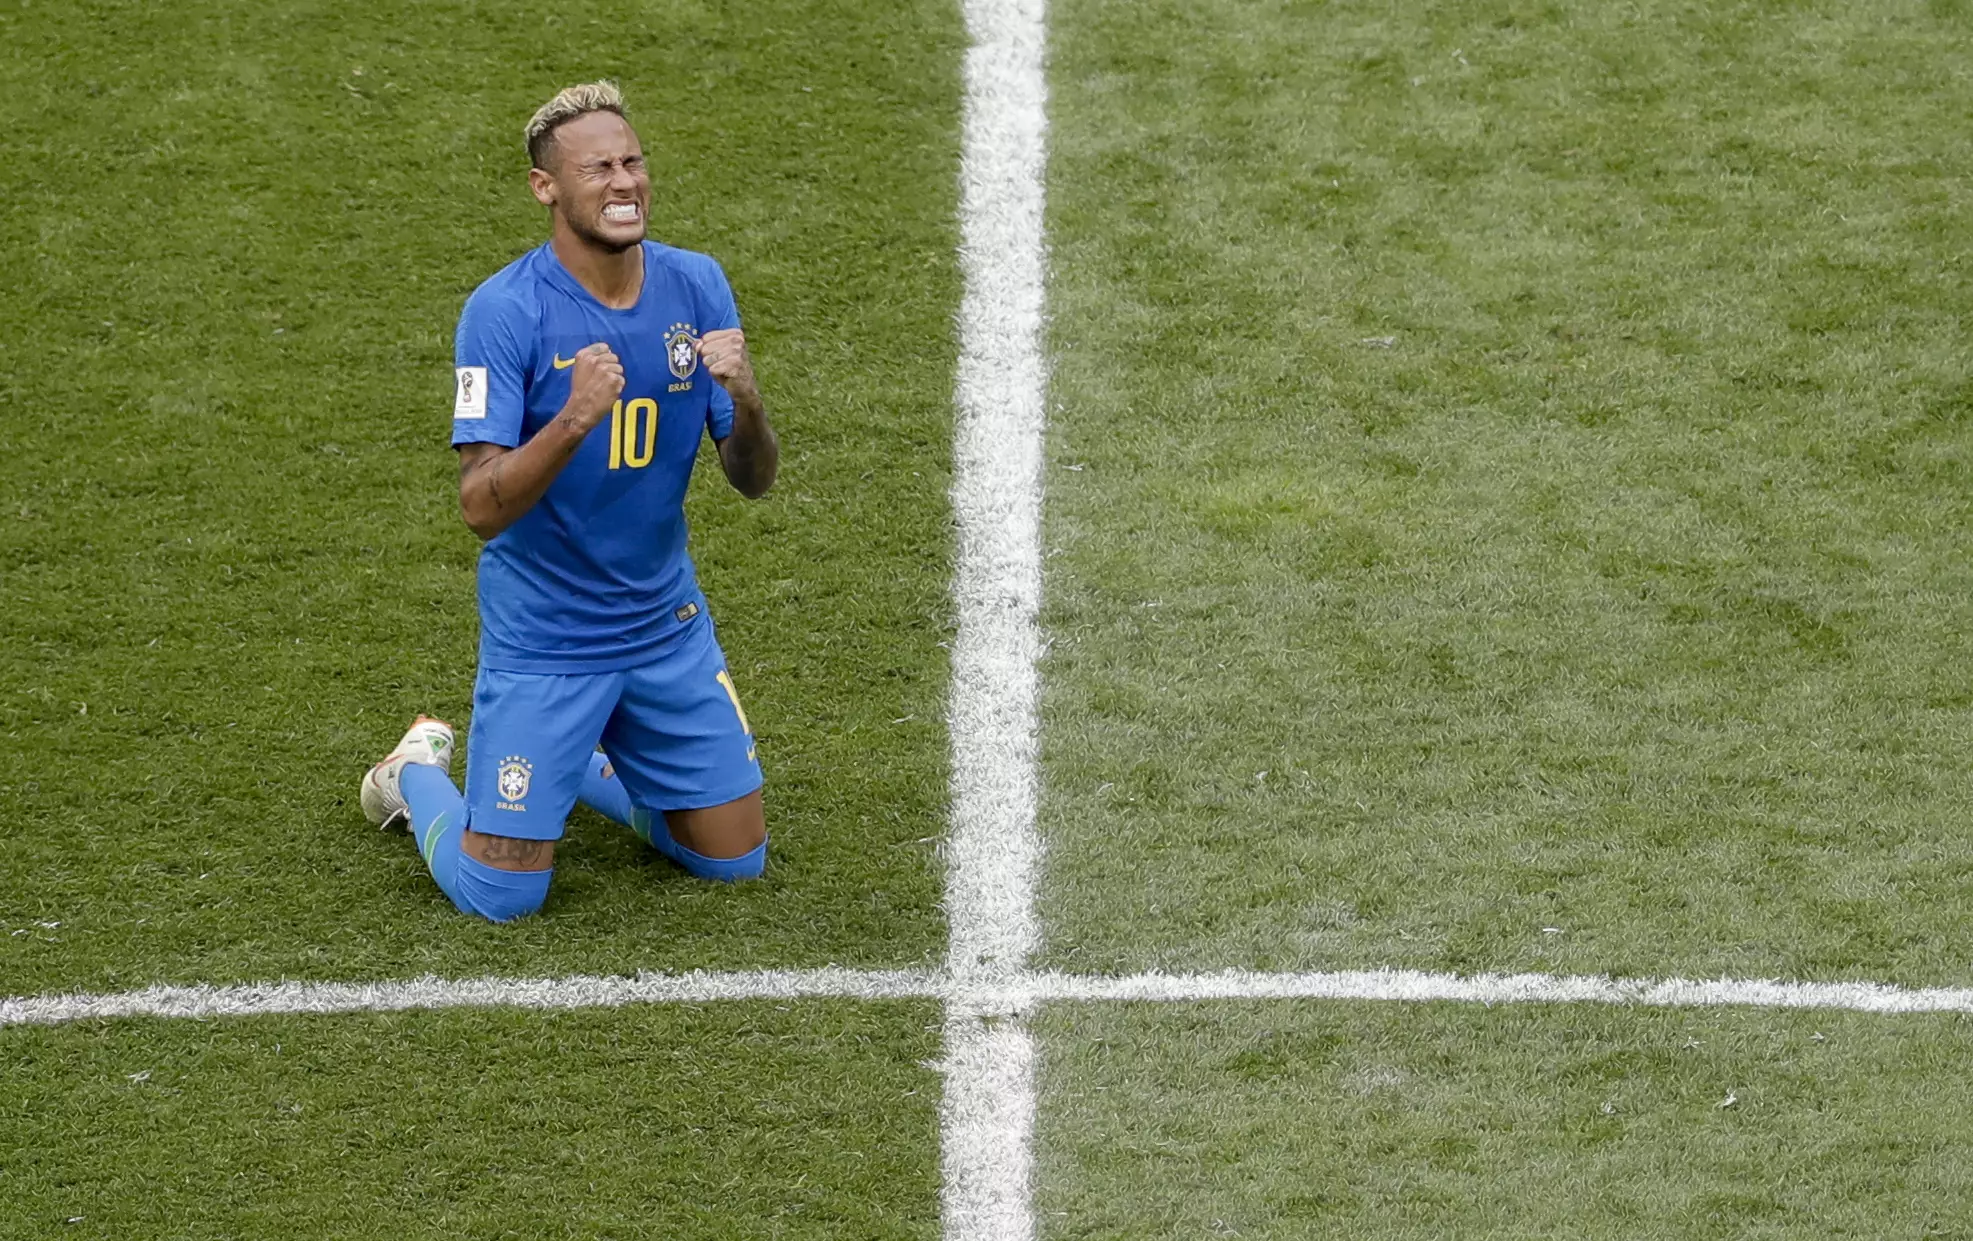 Neymar reacts at the end of the game. Image: PA